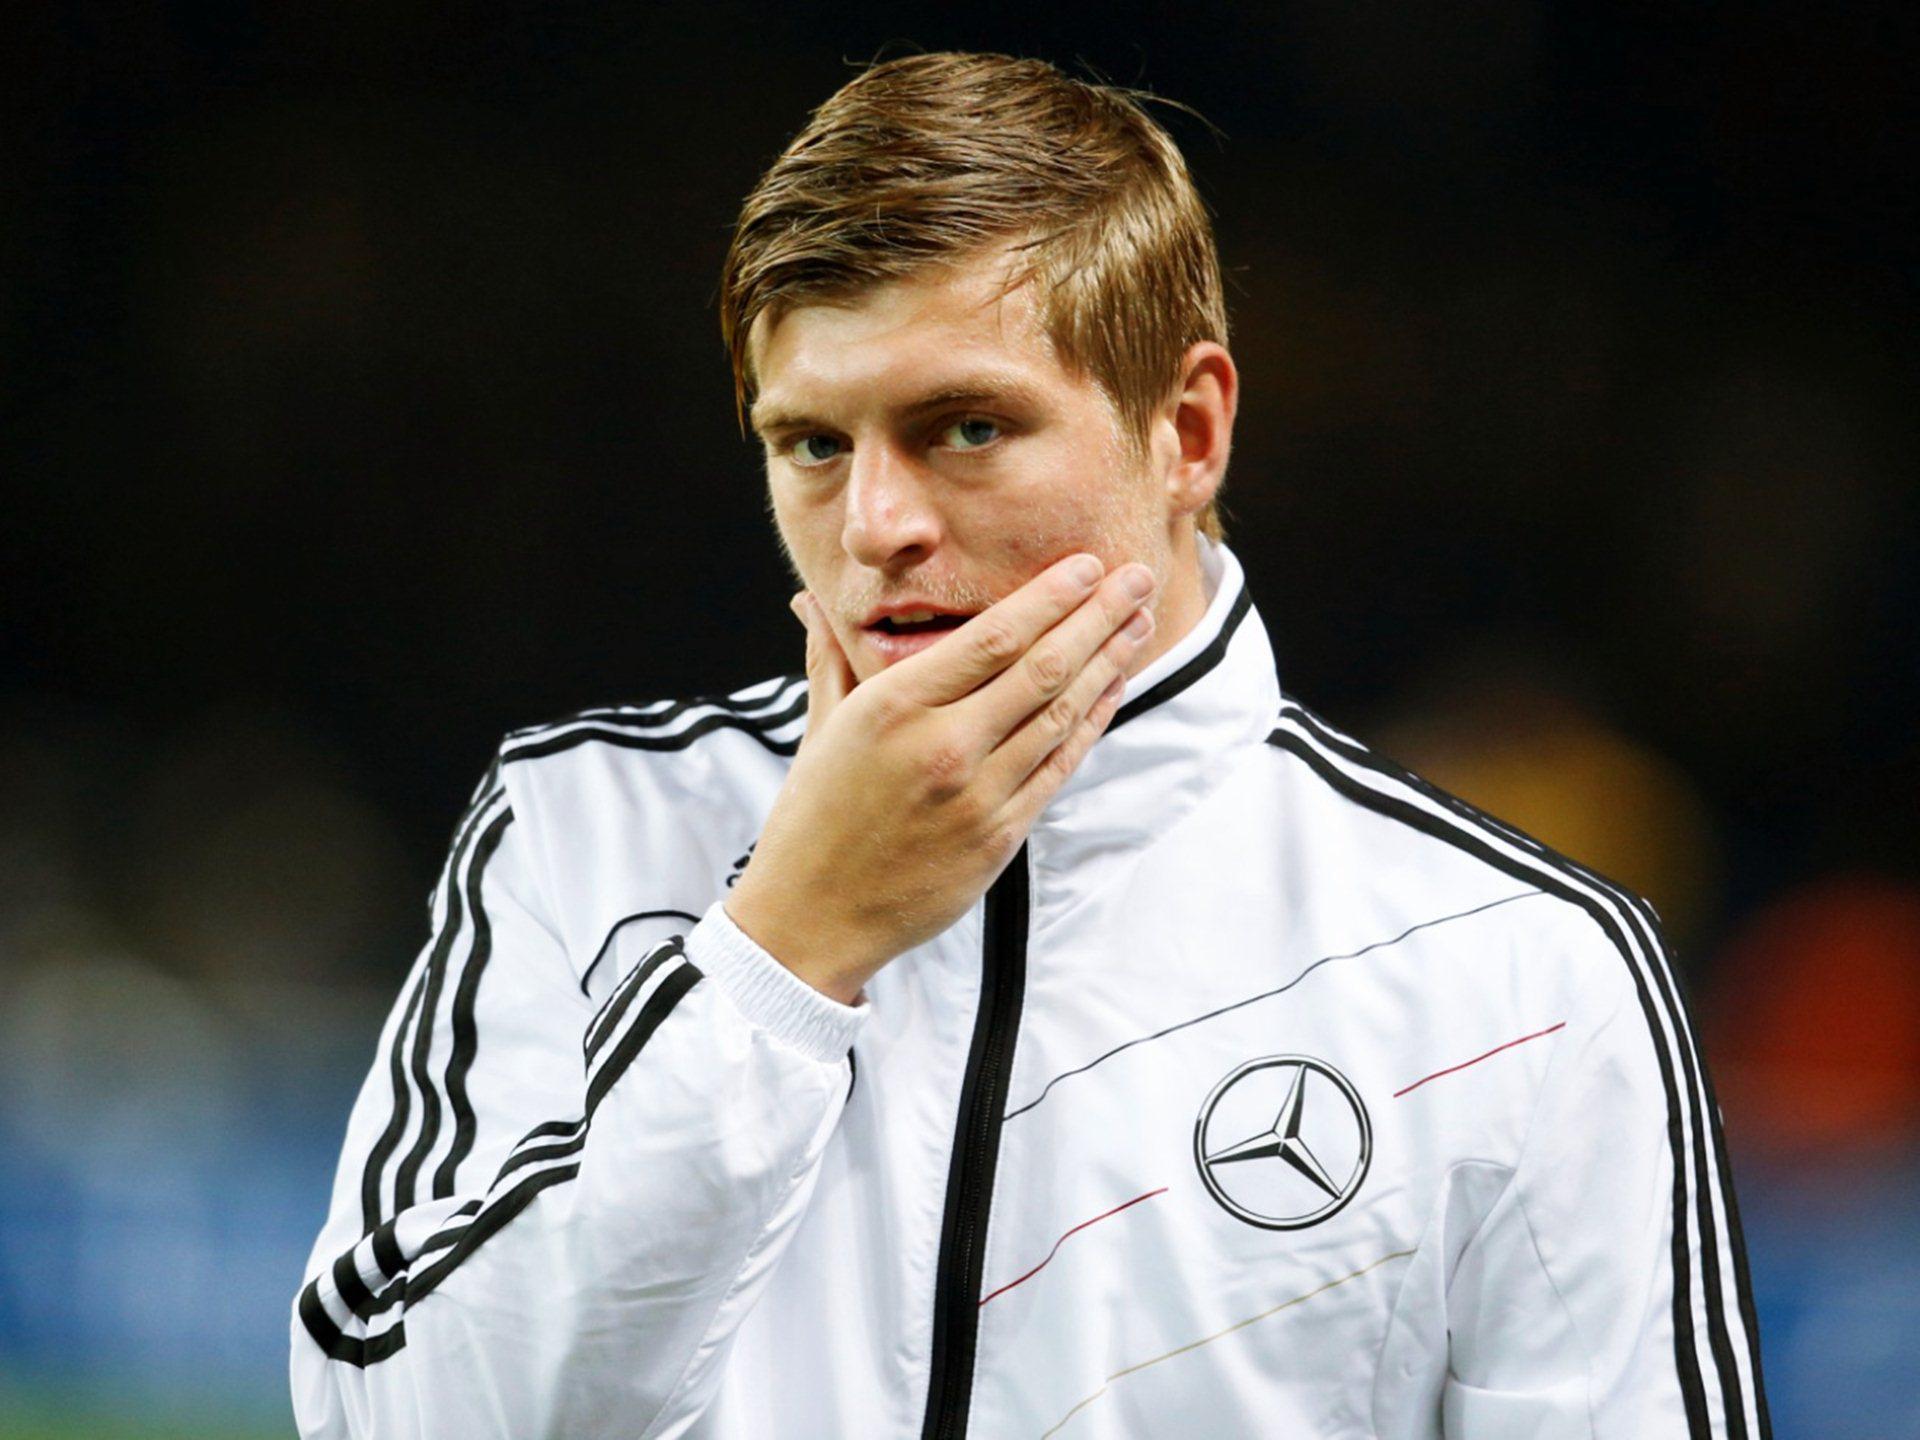 Download Toni Kroos Football Soccer Player Free Mobile Checking Face Hd Background Desktop Pictures